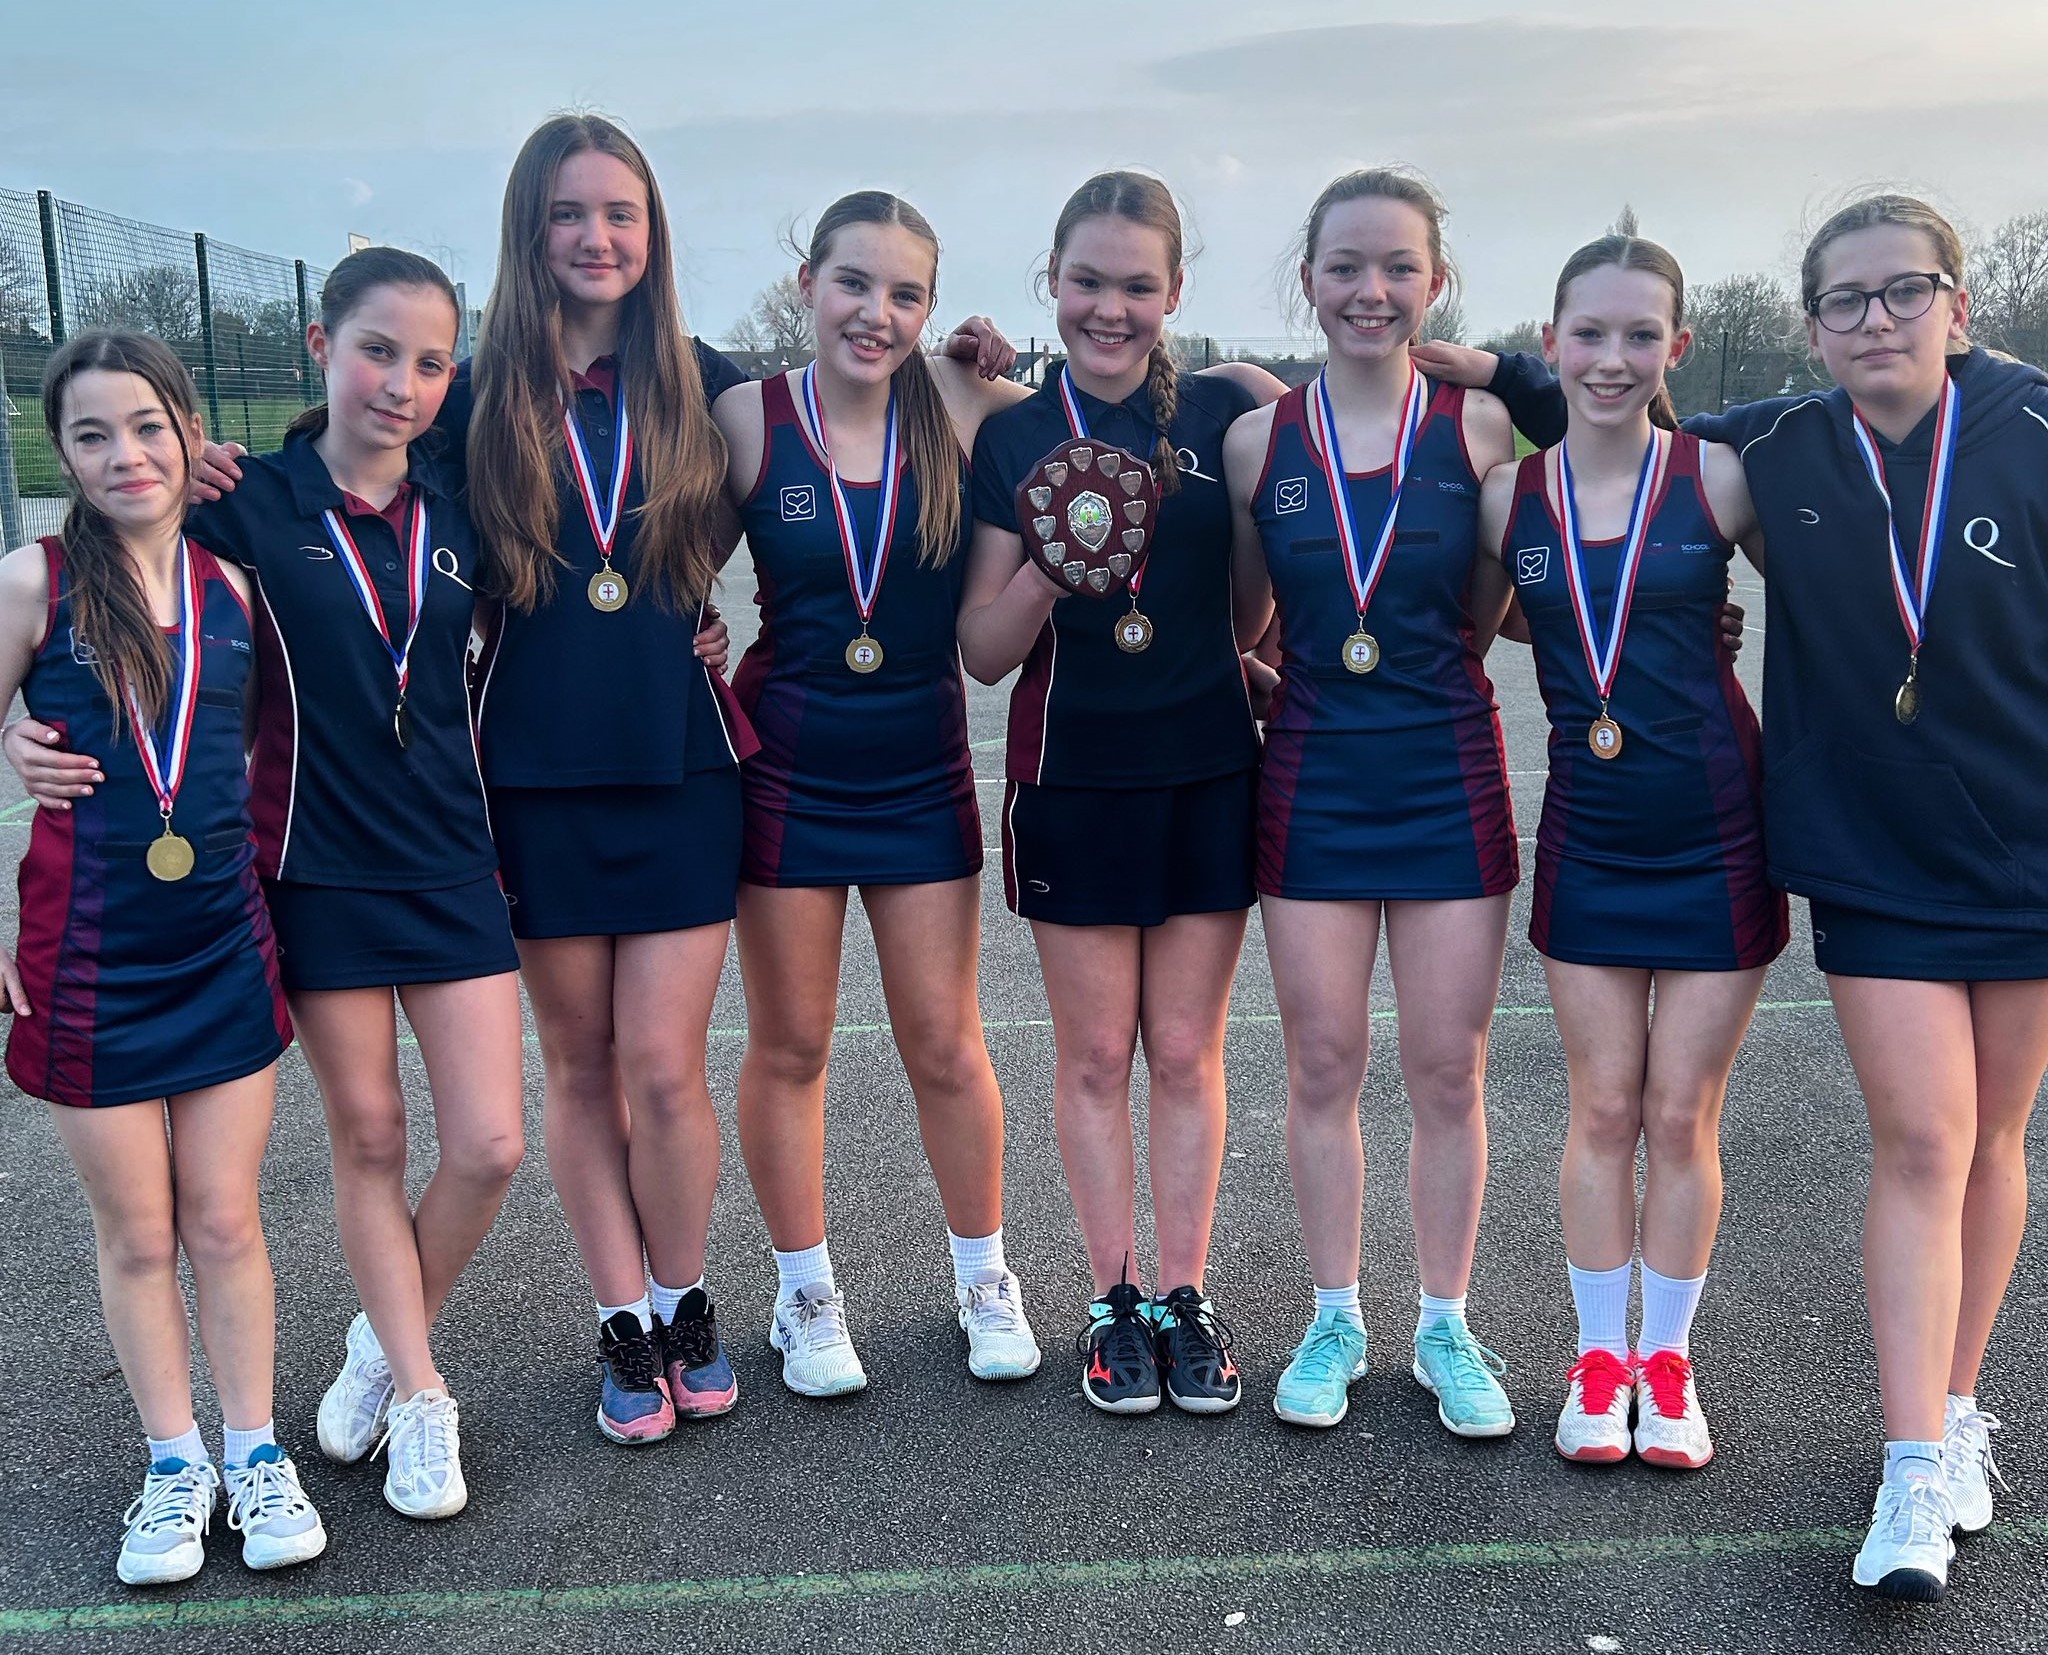 U13 netball team at the Chester and District netball tournament